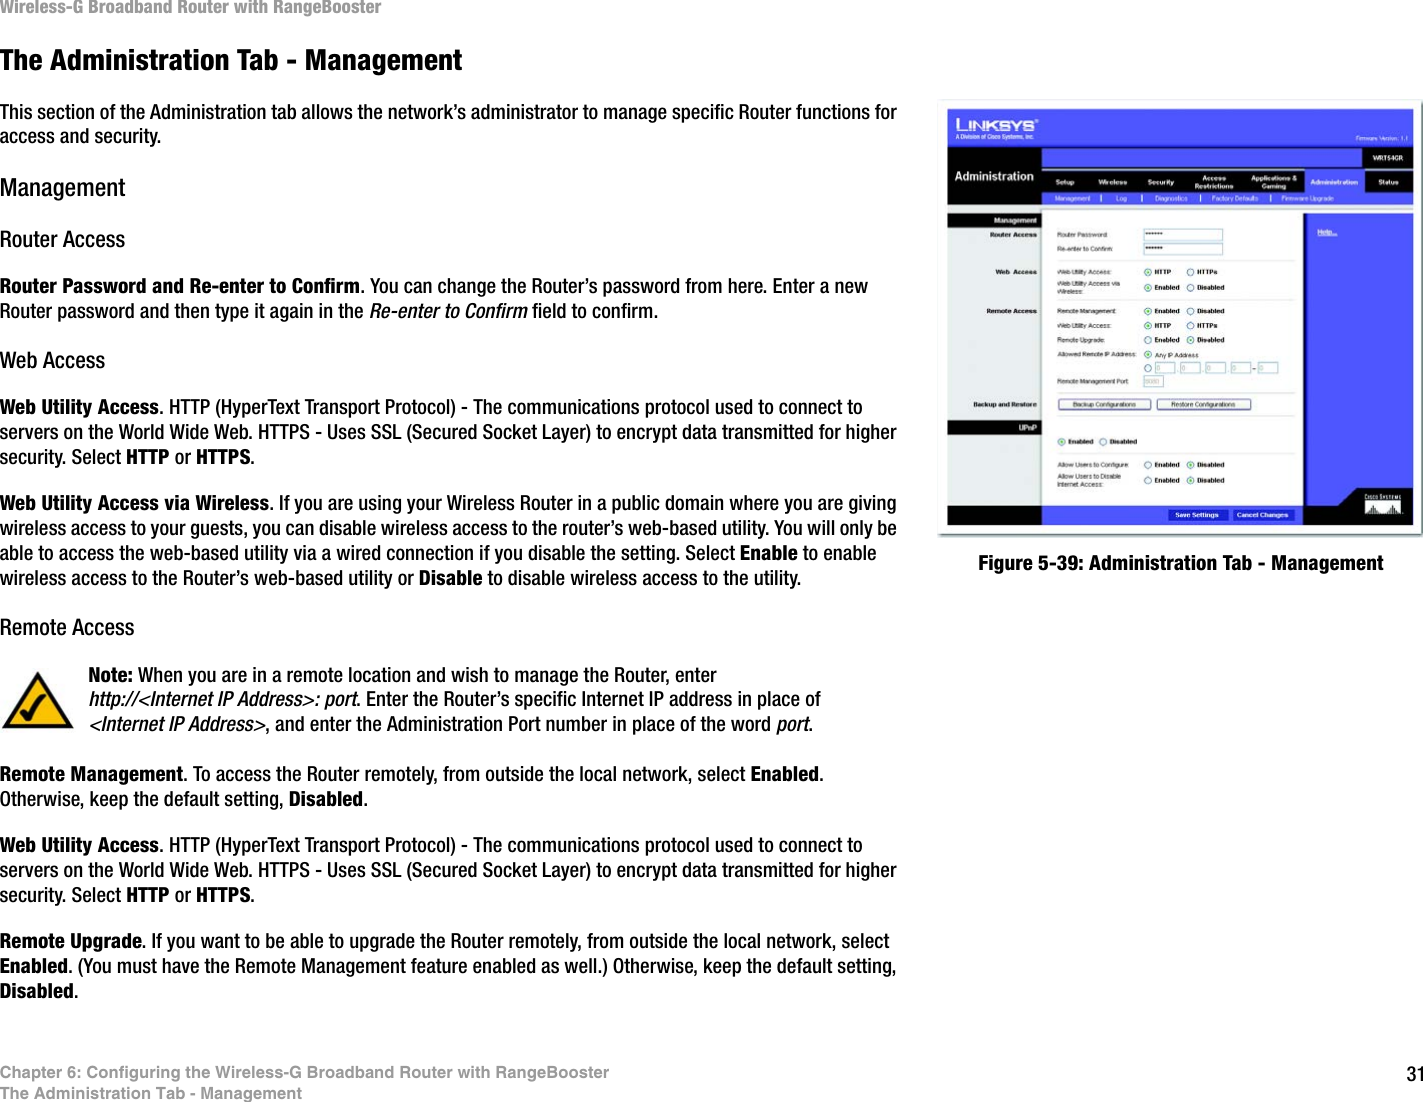 31Chapter 6: Configuring the Wireless-G Broadband Router with RangeBoosterThe Administration Tab - ManagementWireless-G Broadband Router with RangeBoosterThe Administration Tab - ManagementThis section of the Administration tab allows the network’s administrator to manage specific Router functions for access and security.ManagementRouter AccessRouter Password and Re-enter to Confirm. You can change the Router’s password from here. Enter a new Router password and then type it again in the Re-enter to Confirm field to confirm.Web AccessWeb Utility Access. HTTP (HyperText Transport Protocol) - The communications protocol used to connect to servers on the World Wide Web. HTTPS - Uses SSL (Secured Socket Layer) to encrypt data transmitted for higher security. Select HTTP or HTTPS. Web Utility Access via Wireless. If you are using your Wireless Router in a public domain where you are giving wireless access to your guests, you can disable wireless access to the router’s web-based utility. You will only be able to access the web-based utility via a wired connection if you disable the setting. Select Enable to enable wireless access to the Router’s web-based utility or Disable to disable wireless access to the utility.Remote AccessRemote Management. To access the Router remotely, from outside the local network, select Enabled. Otherwise, keep the default setting, Disabled.Web Utility Access. HTTP (HyperText Transport Protocol) - The communications protocol used to connect to servers on the World Wide Web. HTTPS - Uses SSL (Secured Socket Layer) to encrypt data transmitted for higher security. Select HTTP or HTTPS. Remote Upgrade. If you want to be able to upgrade the Router remotely, from outside the local network, select Enabled. (You must have the Remote Management feature enabled as well.) Otherwise, keep the default setting, Disabled.Figure 5-39: Administration Tab - ManagementNote: When you are in a remote location and wish to manage the Router, enter http://&lt;Internet IP Address&gt;: port. Enter the Router’s specific Internet IP address in place of &lt;Internet IP Address&gt;, and enter the Administration Port number in place of the word port.